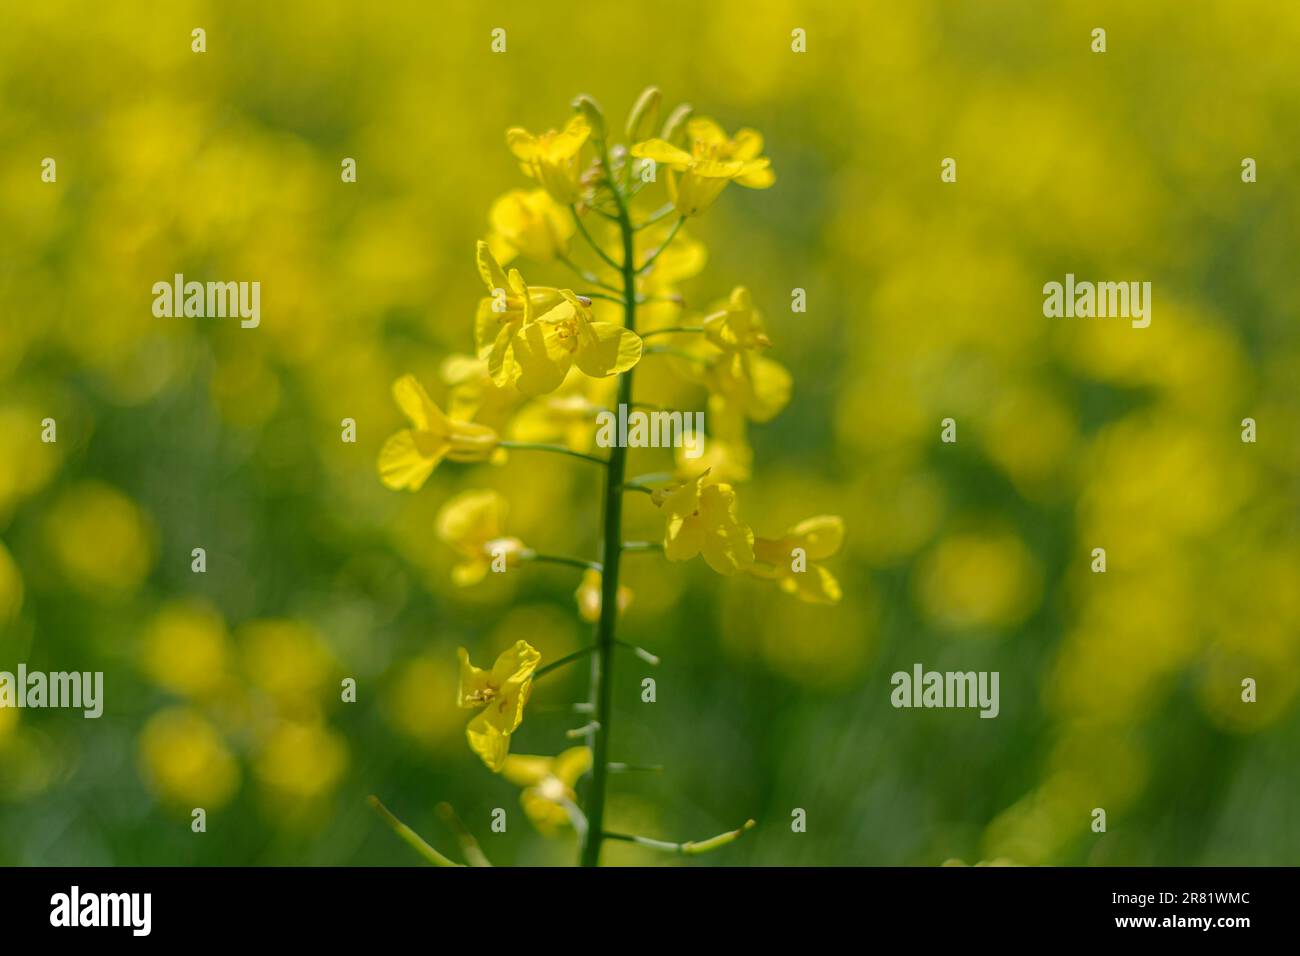 Yellow canola plant in bloom with yellow flower petals Stock Photo